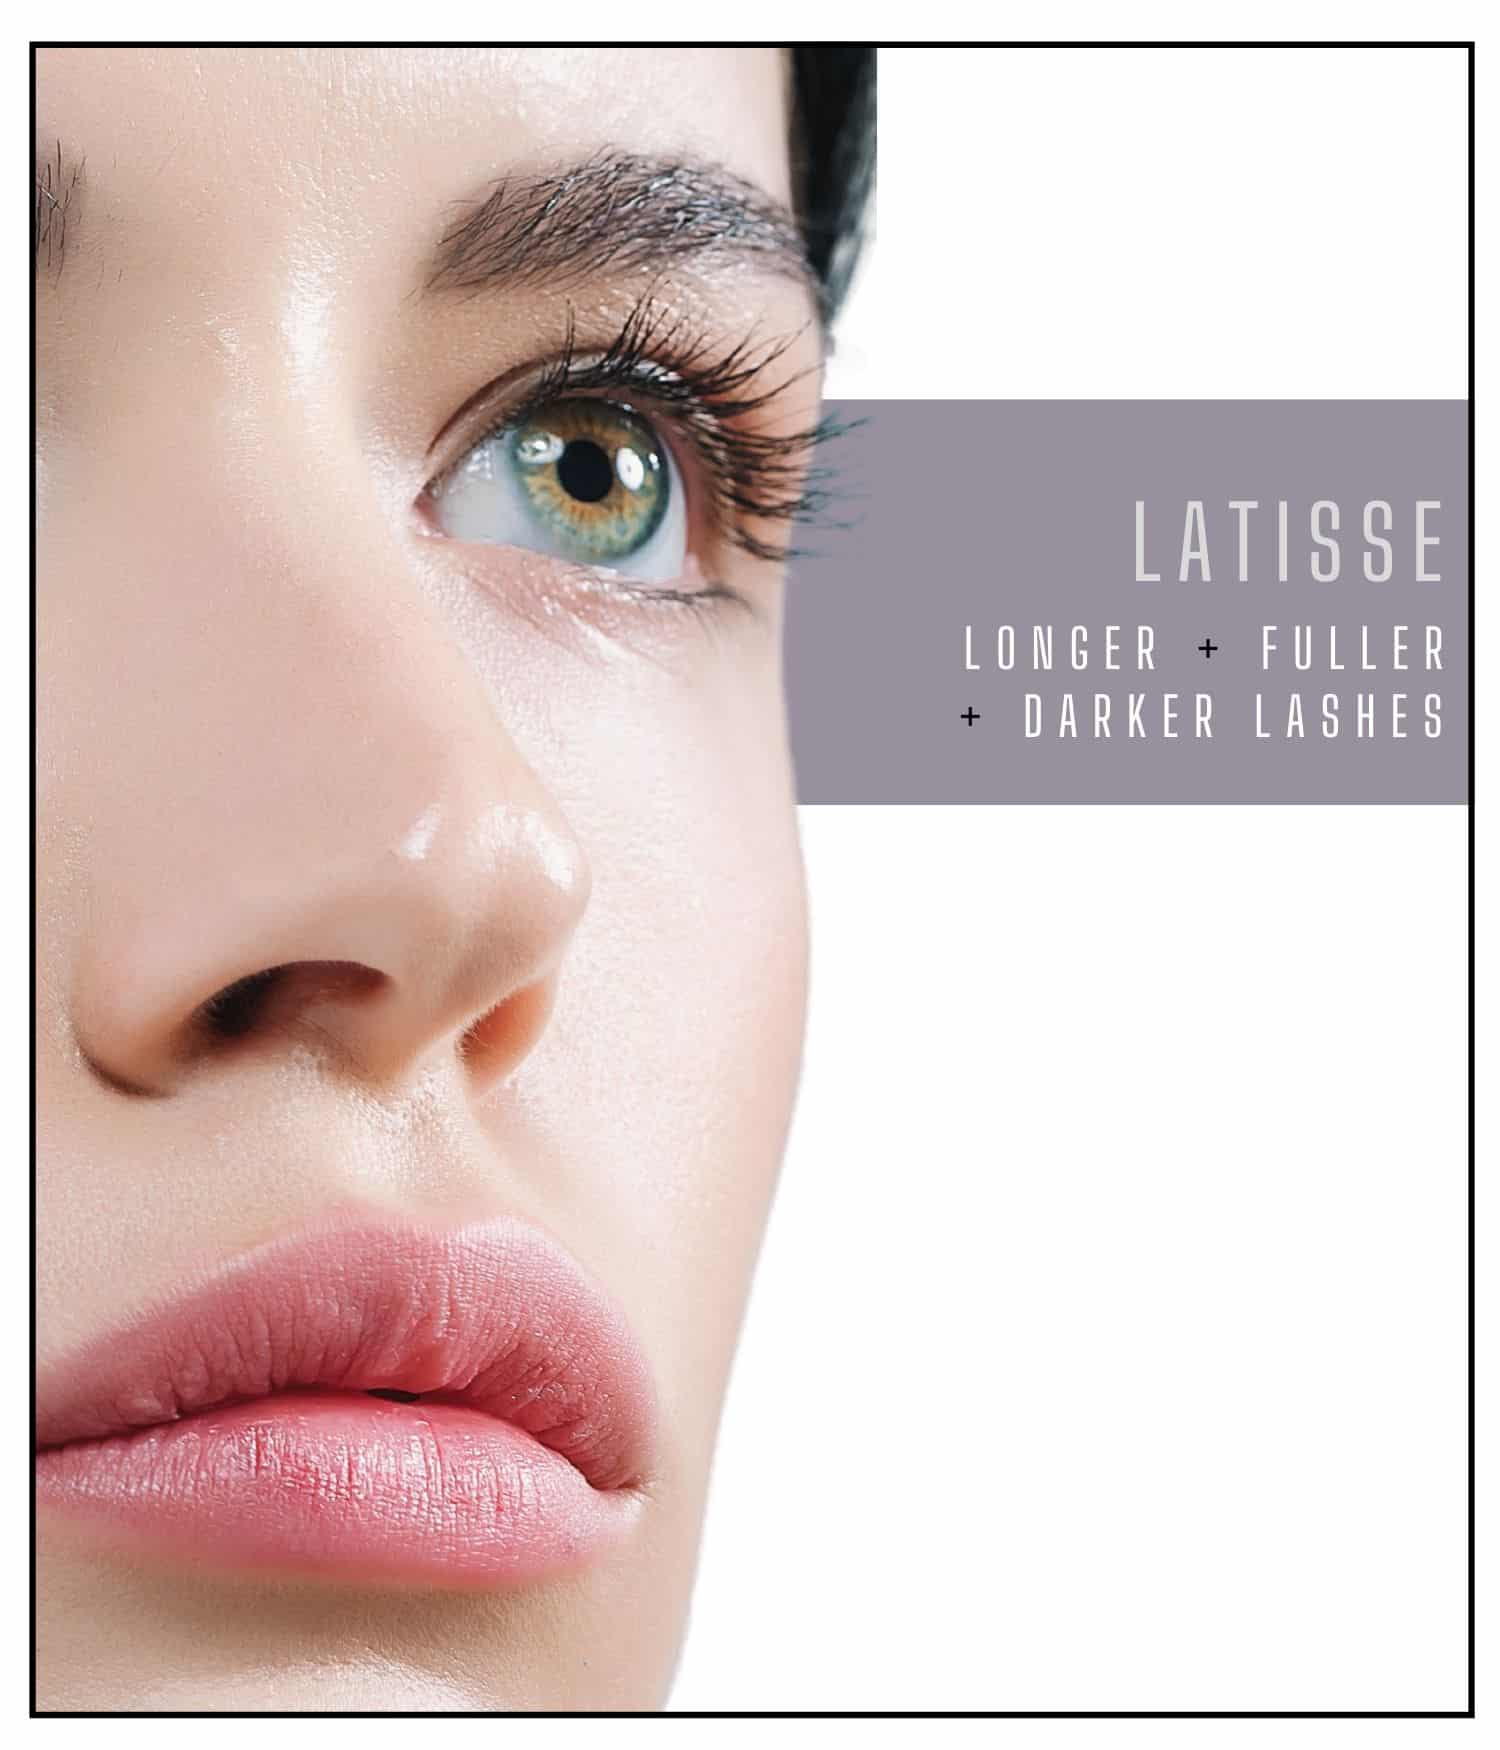 Woman with longer, fuller, and darker lashes from Latisse treatment.